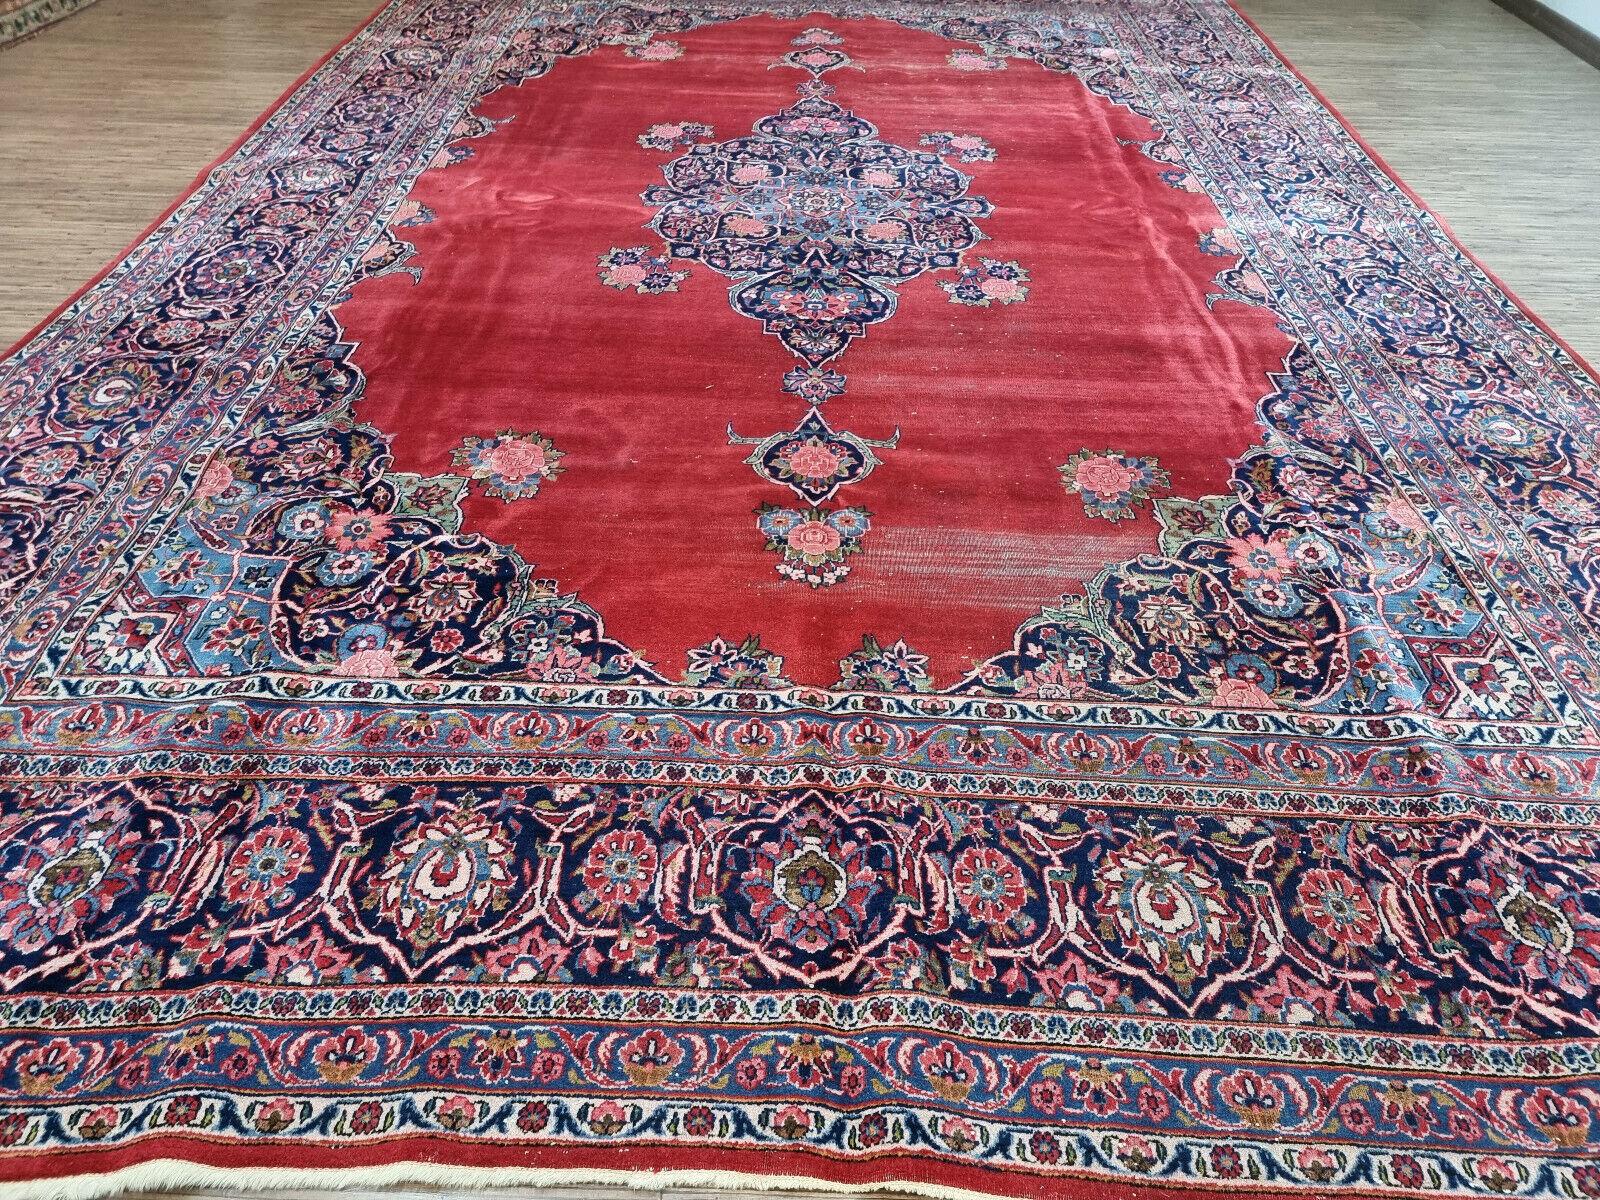 Handmade Antique Persian Style Kashan Distressed Rug 8.5' x 12.9', 1920s - 1D68 In Good Condition For Sale In Bordeaux, FR